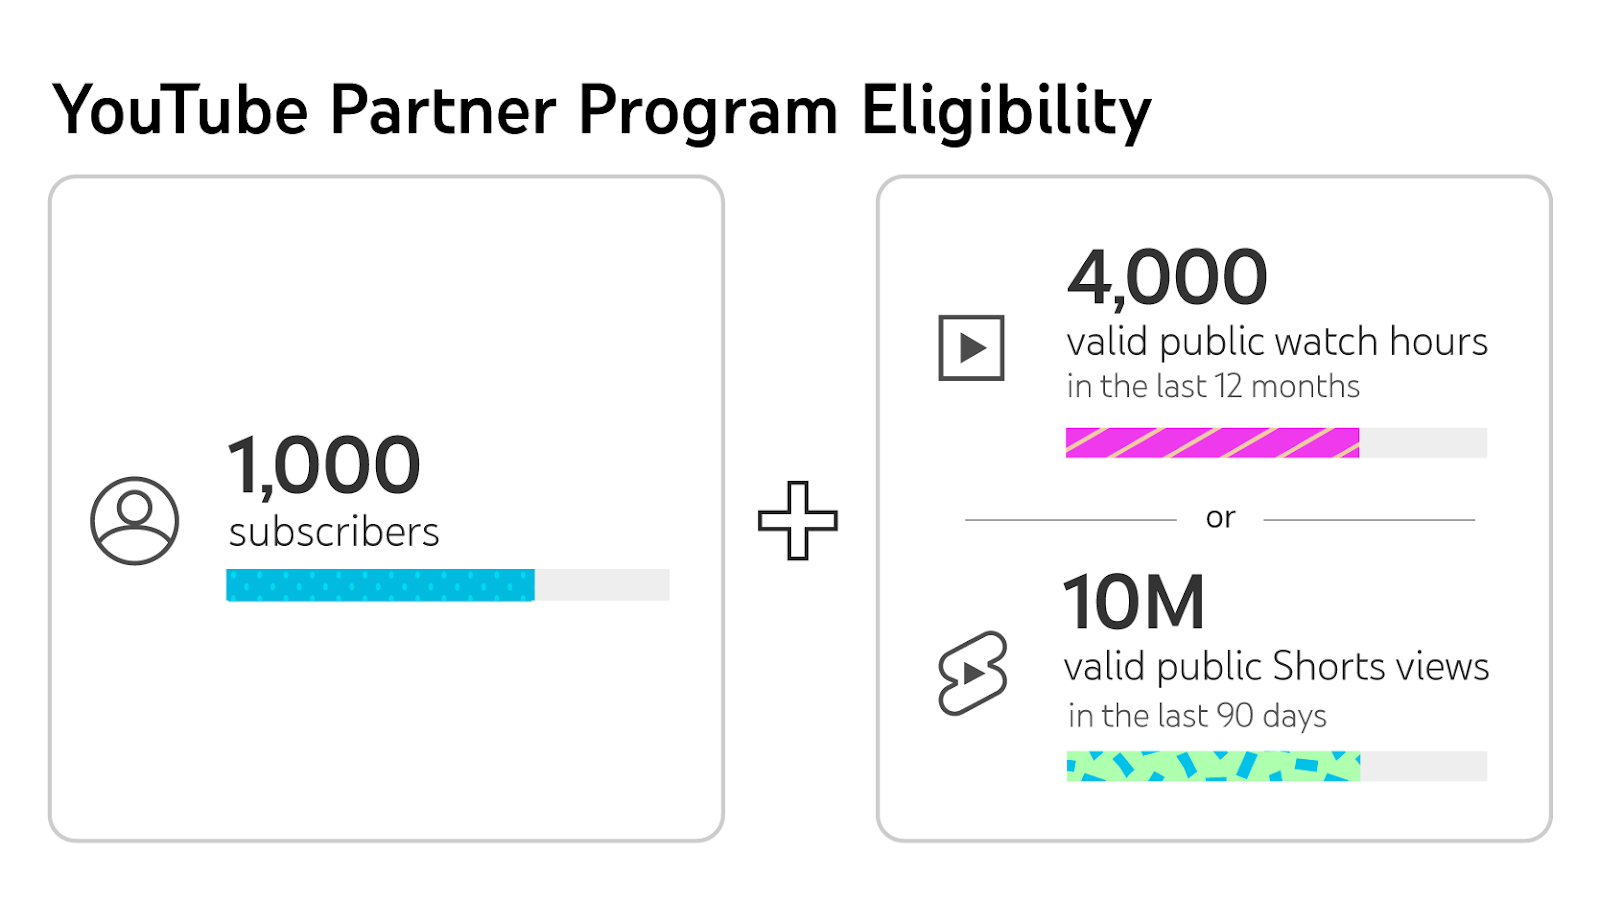 YouTube Partner Program Eligibility: A graphic showing YPP requirements. On the left, "1,000 subscribers" in the middle a plus (+) symbol. On the right, "4,000 valid public watch hours in the last 12 months" middle right: "or" Bottom: "10M valid public Shorts views in the last 90 days"